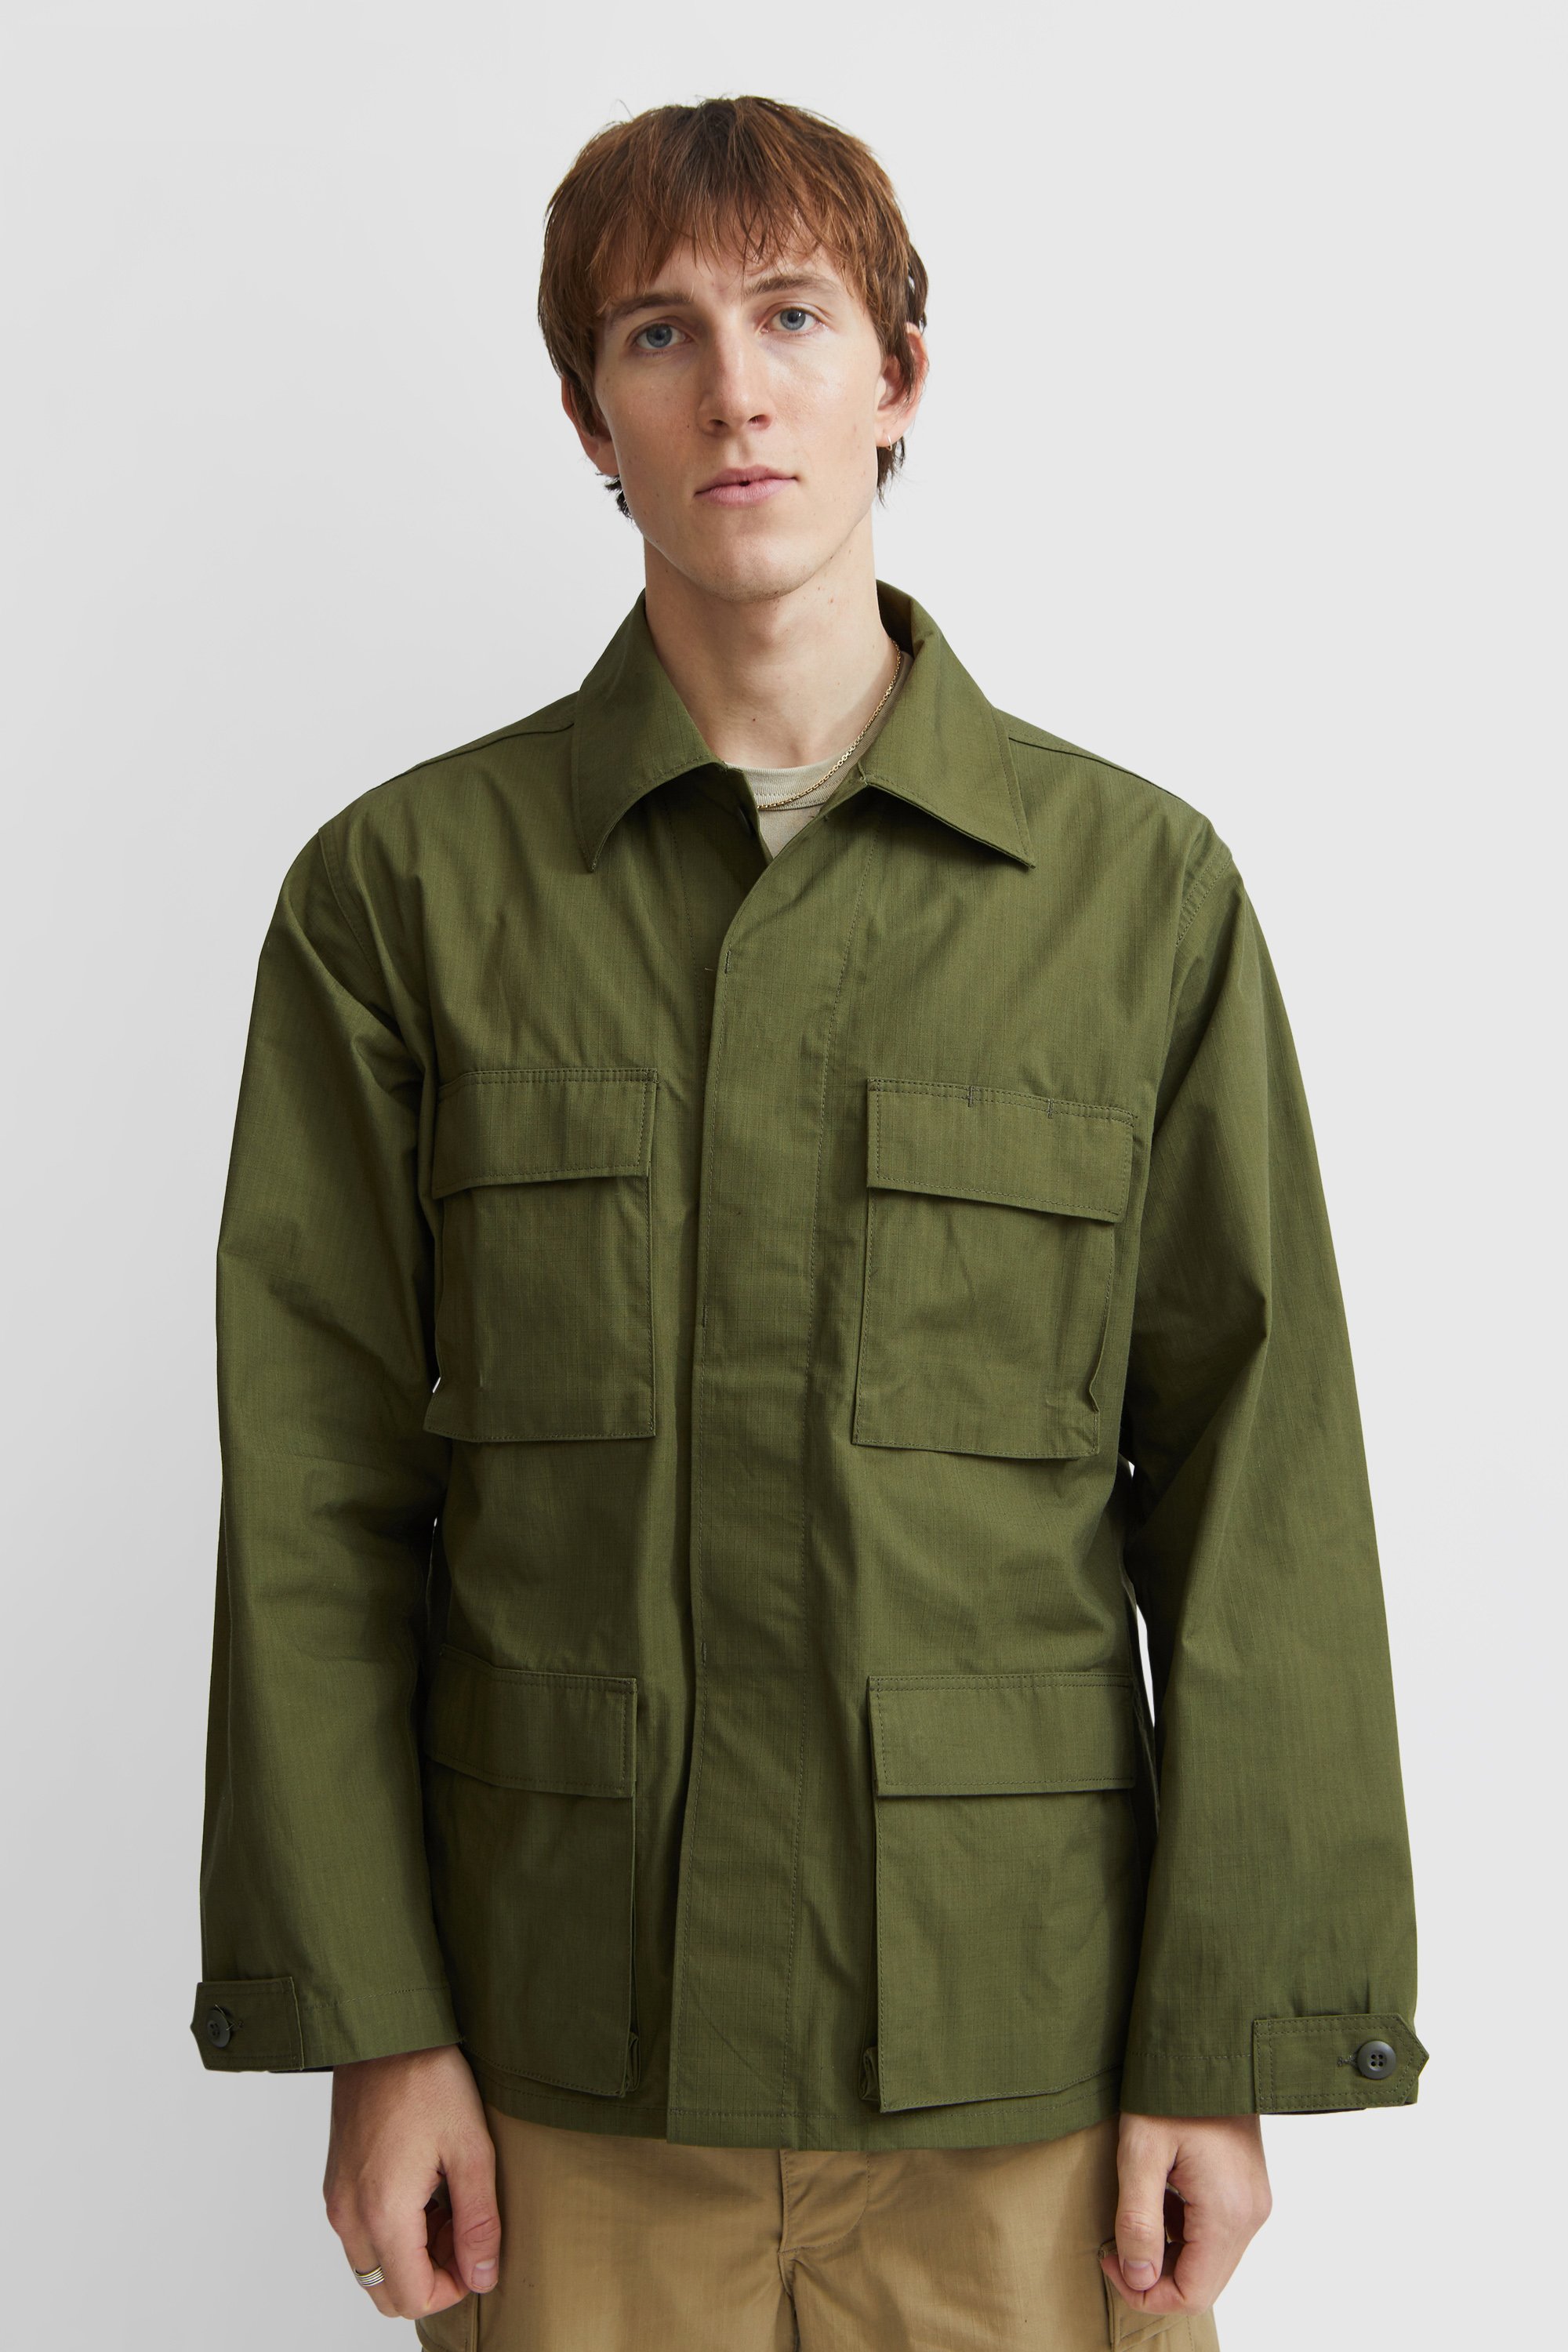 WTAPS WMILL- 01 / LS / Nyco. Ripstop Olive drab | WoodWood.com